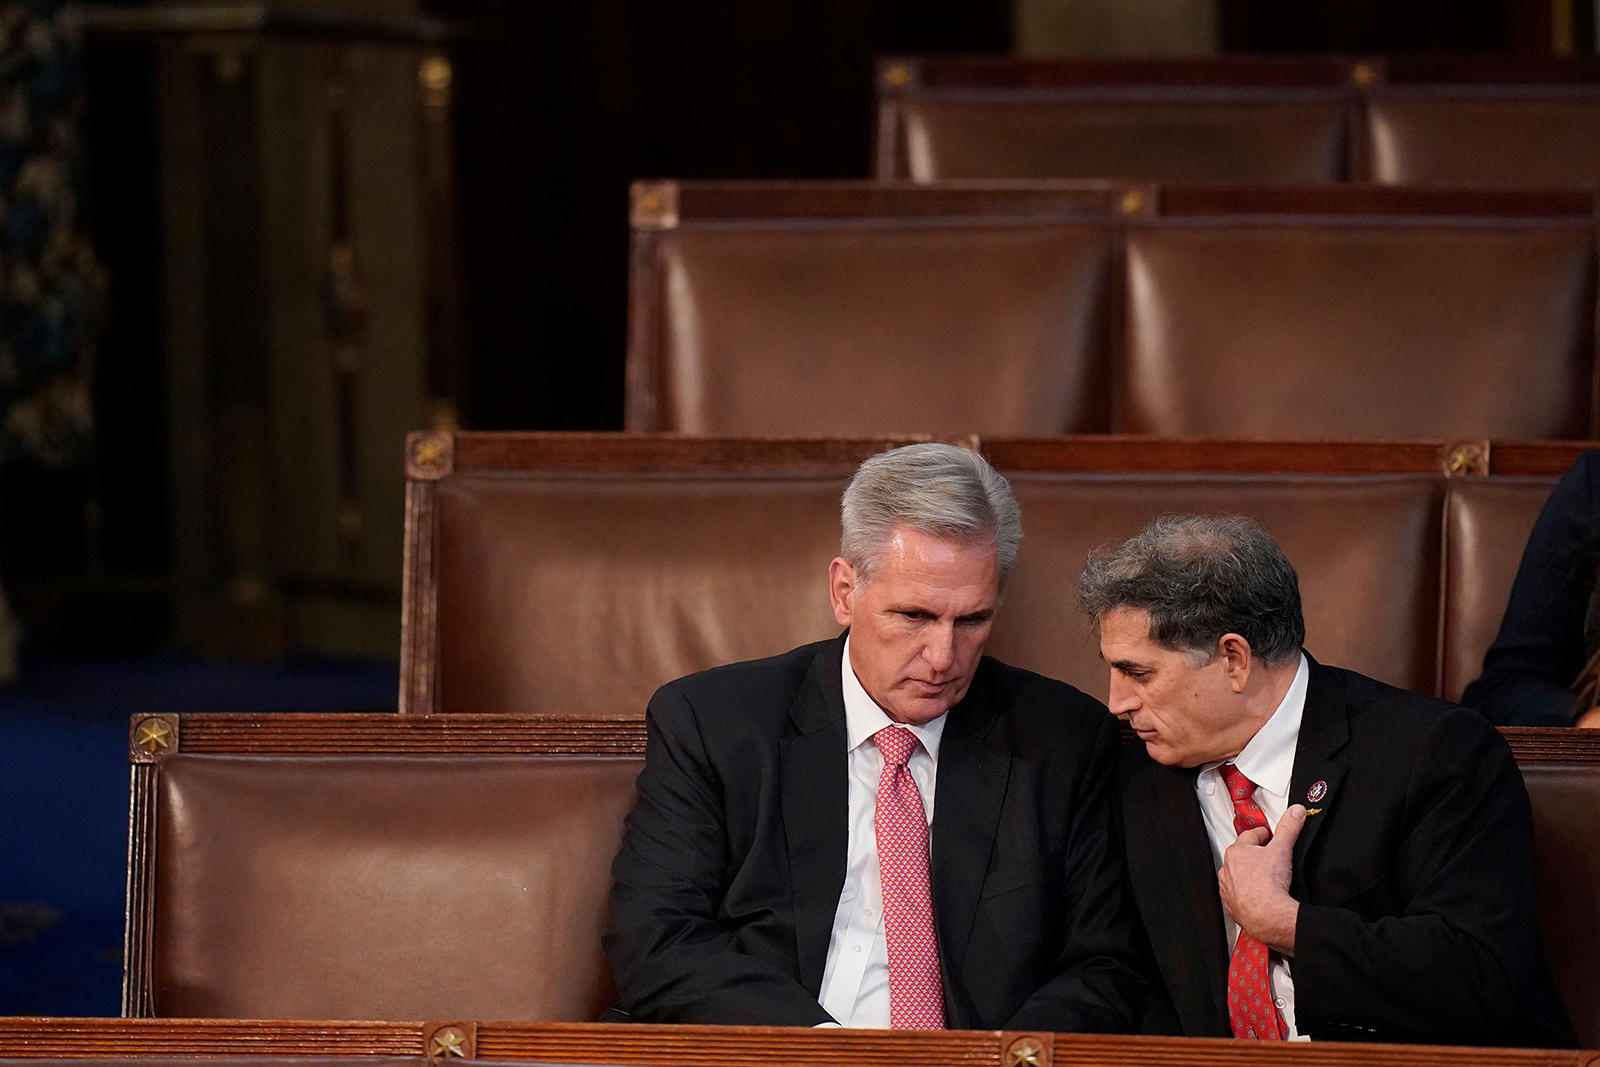 Republican leader Kevin McCarthy, left, talks with US Rep. Andrew Clyde after a failed seventh vote for the speakership on Thursday, January 5. Clyde, from Georgia, is one of the Republicans who has voted against McCarthy getting the speakership.